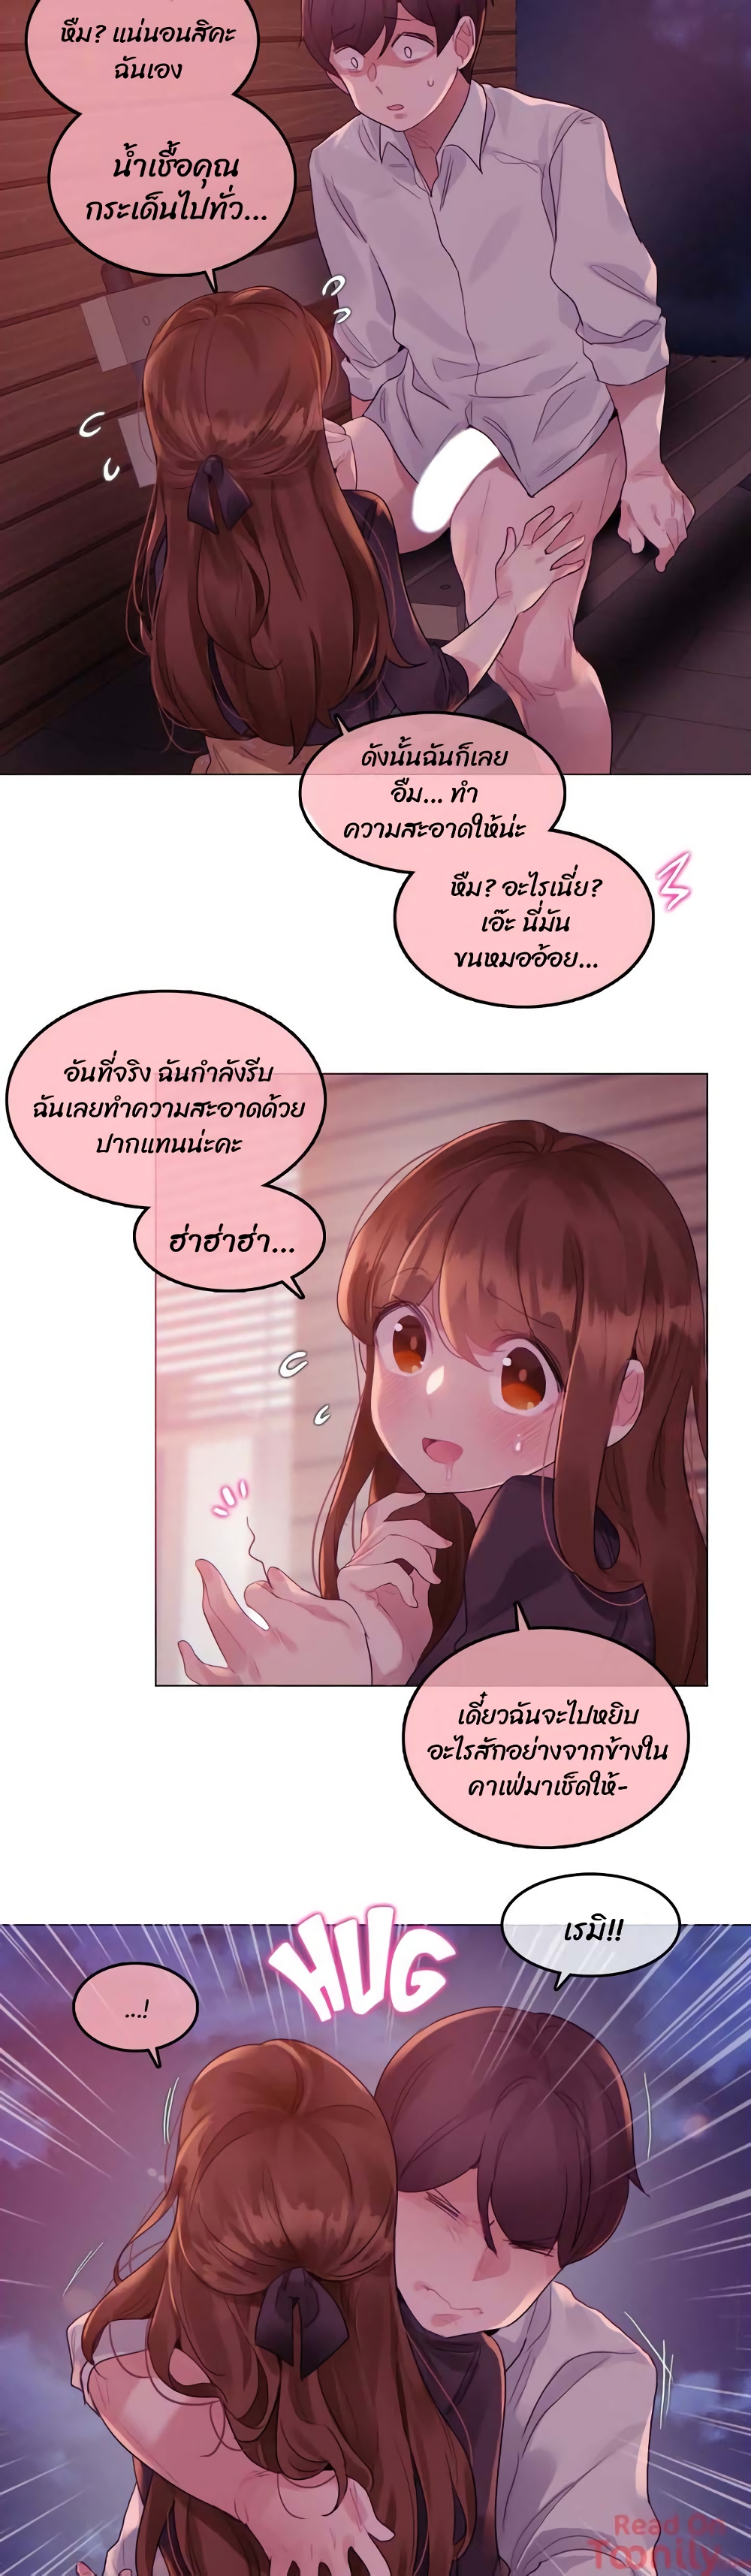 A Pervert's Daily Life 90-90